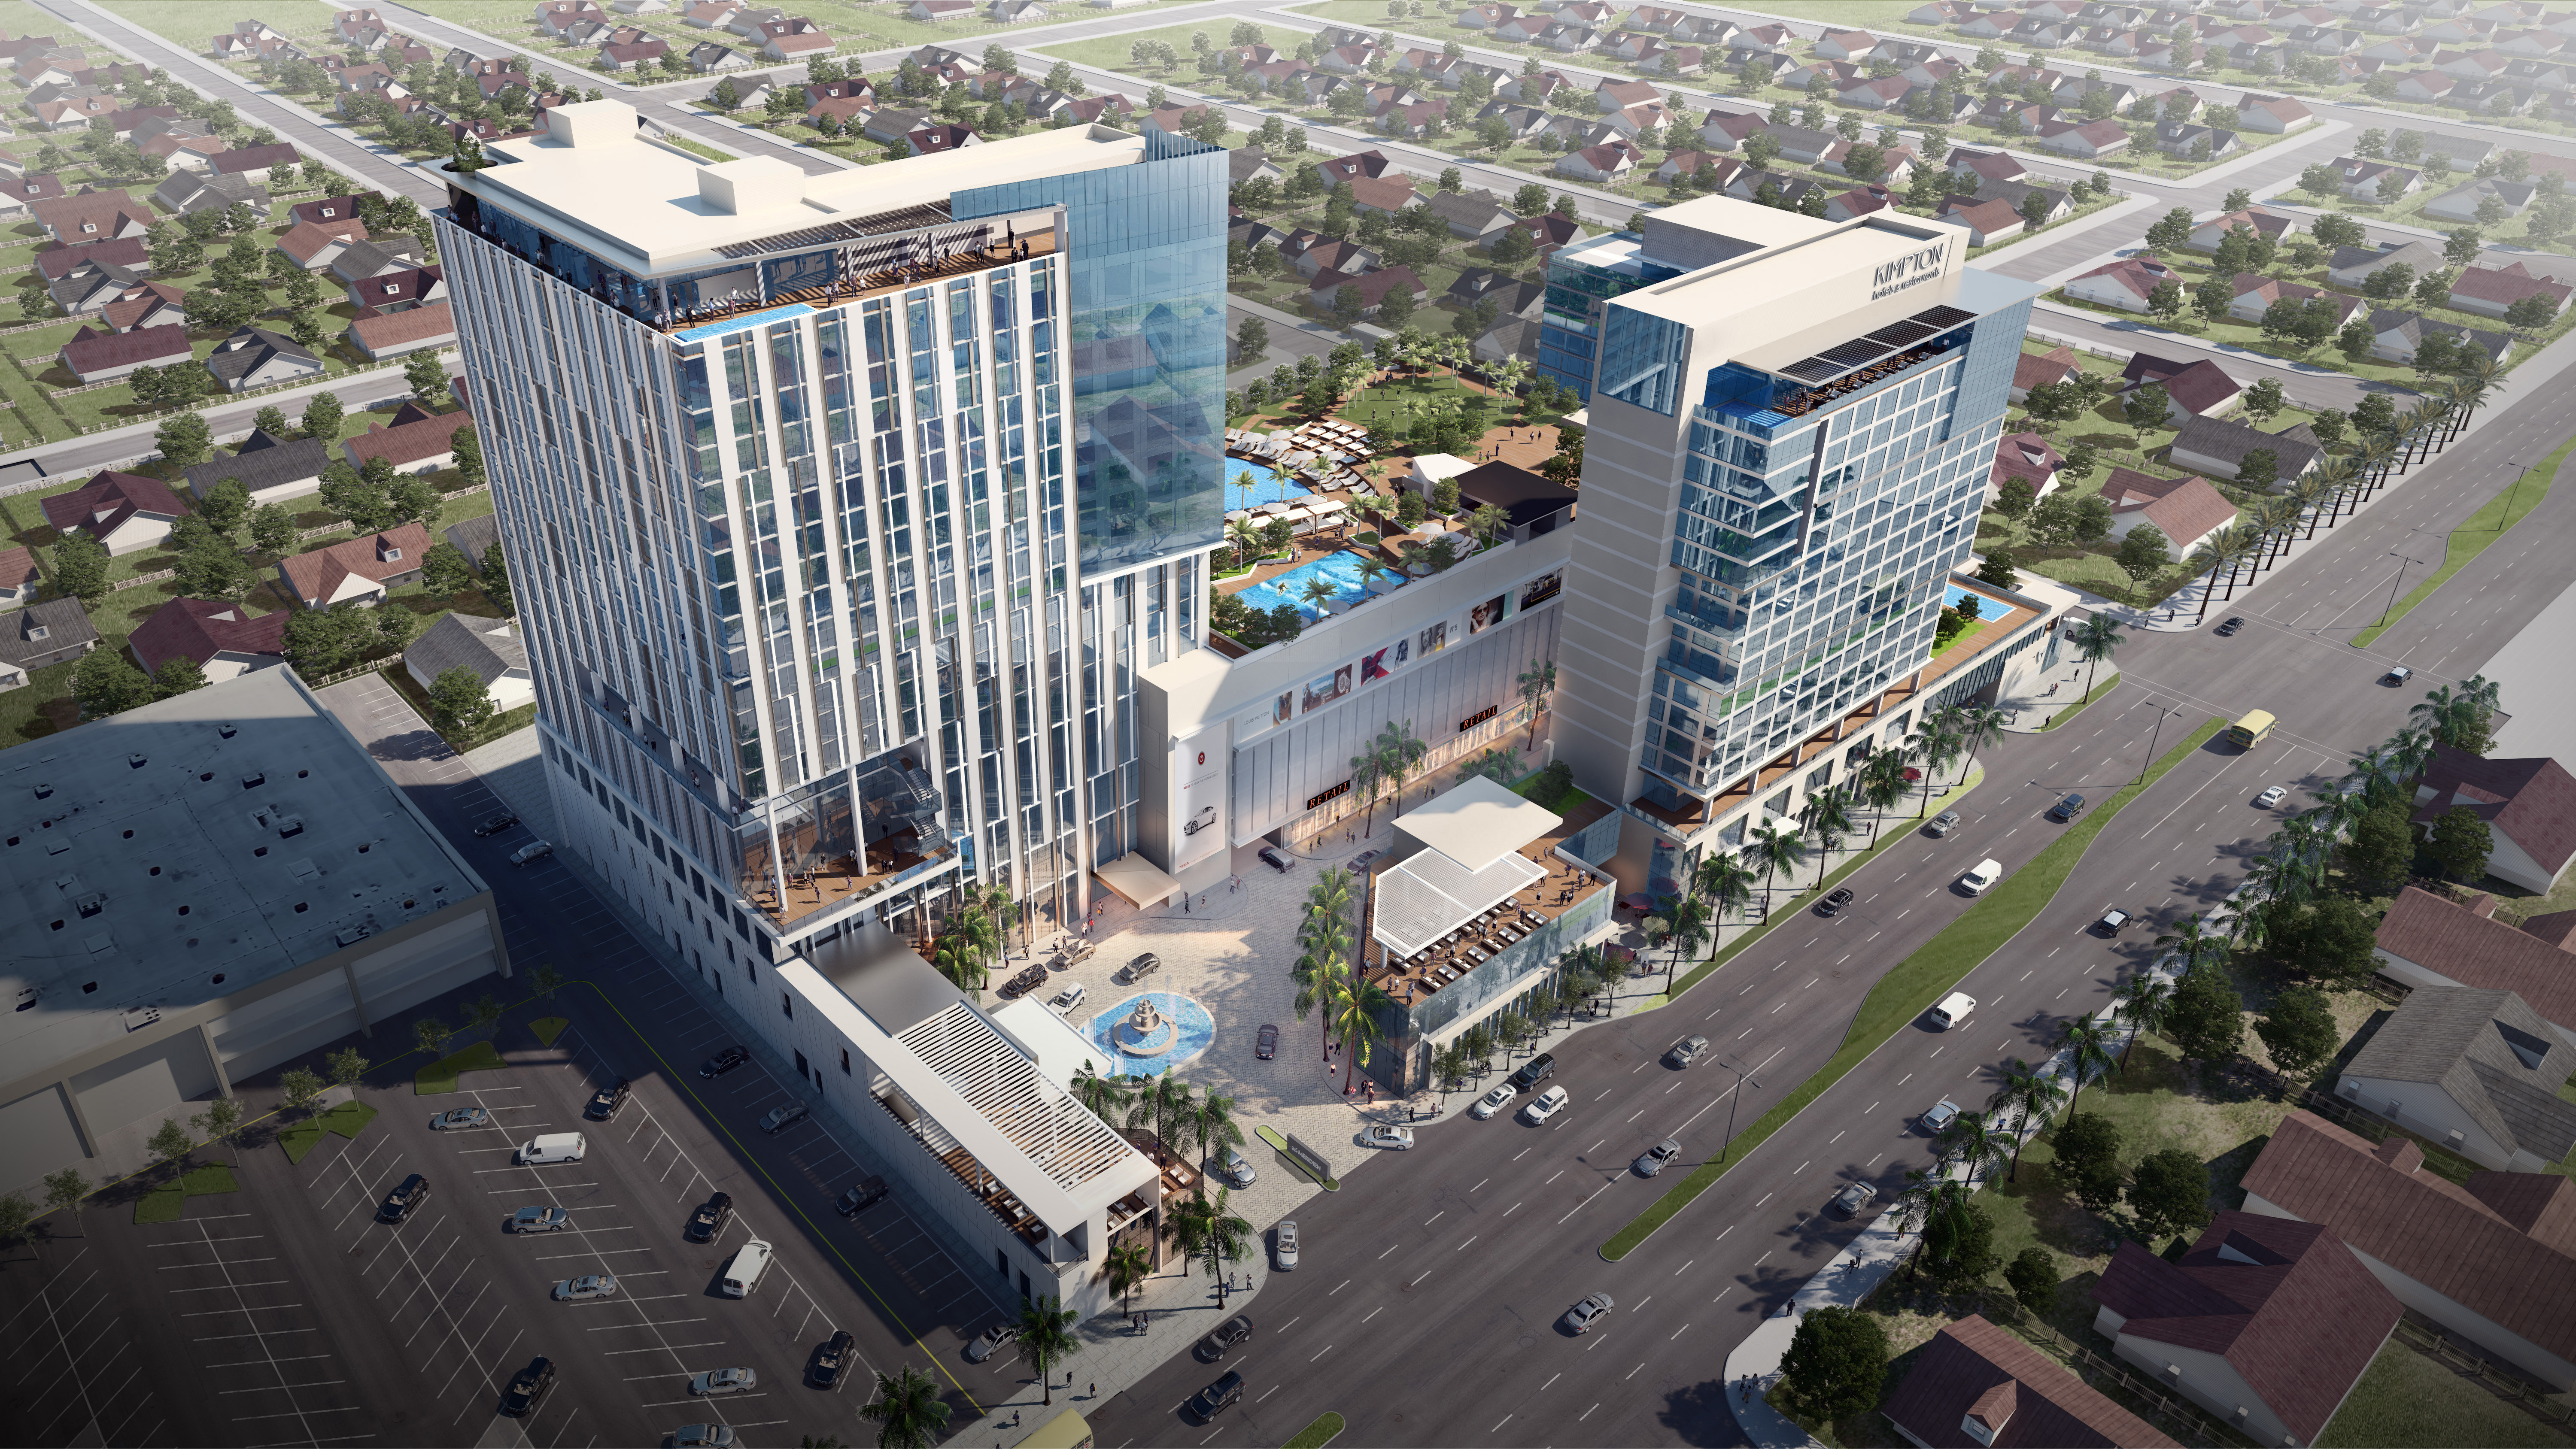 The mixed-use development will be located in the Grove District Anaheim Resort area in the city of Garden Grove Calif